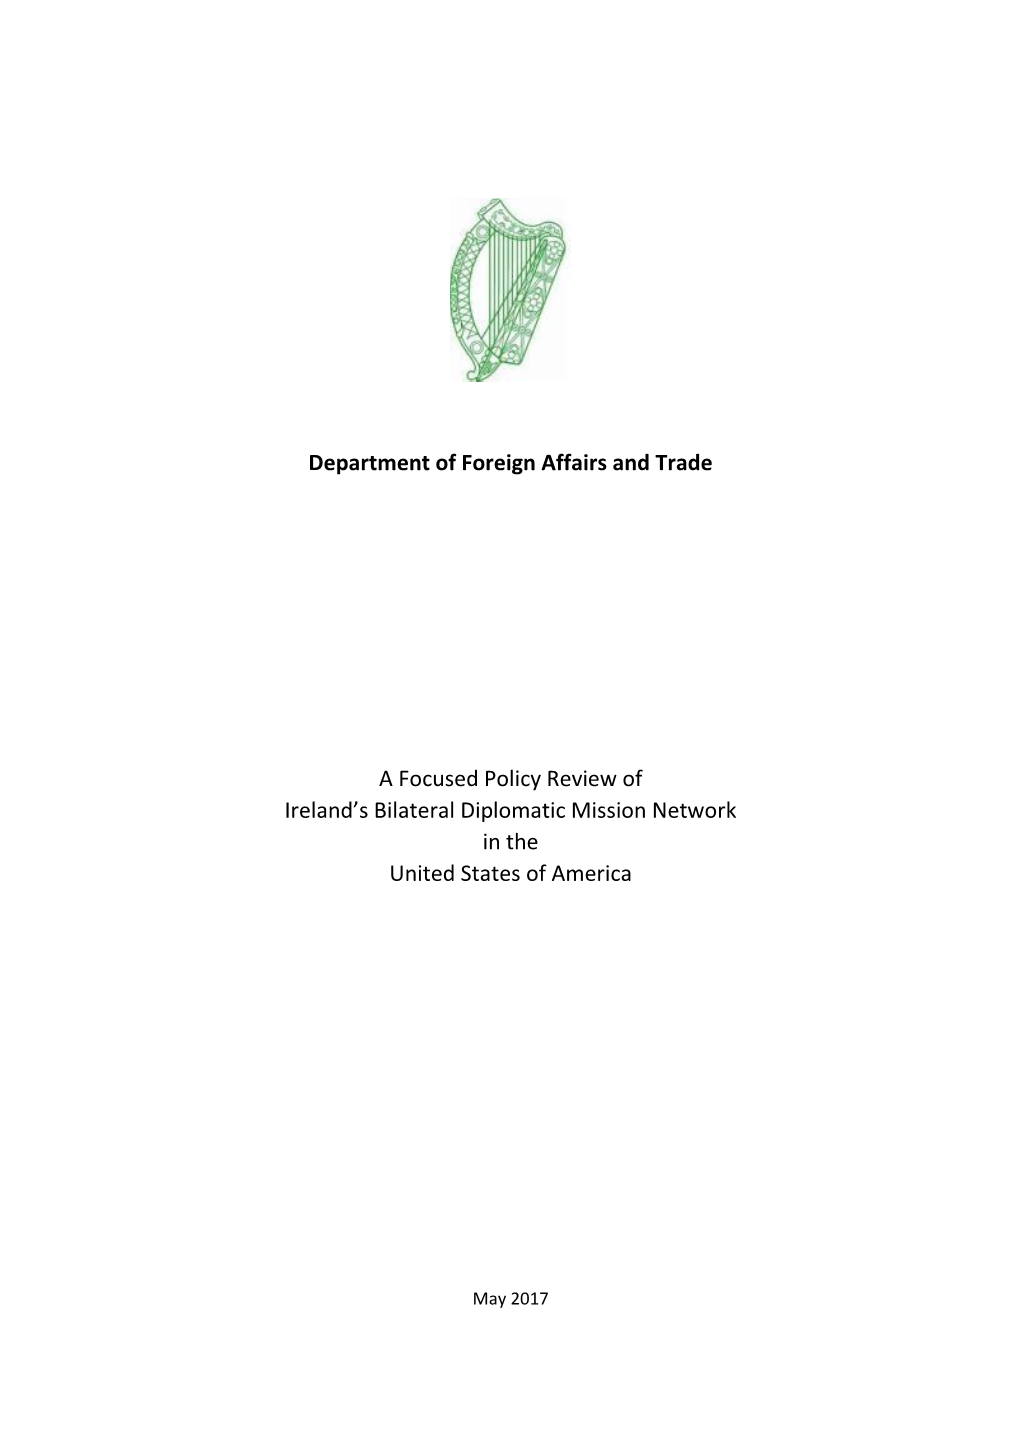 A Focused Policy Review of Ireland's Bilateral Diplomatic Mission